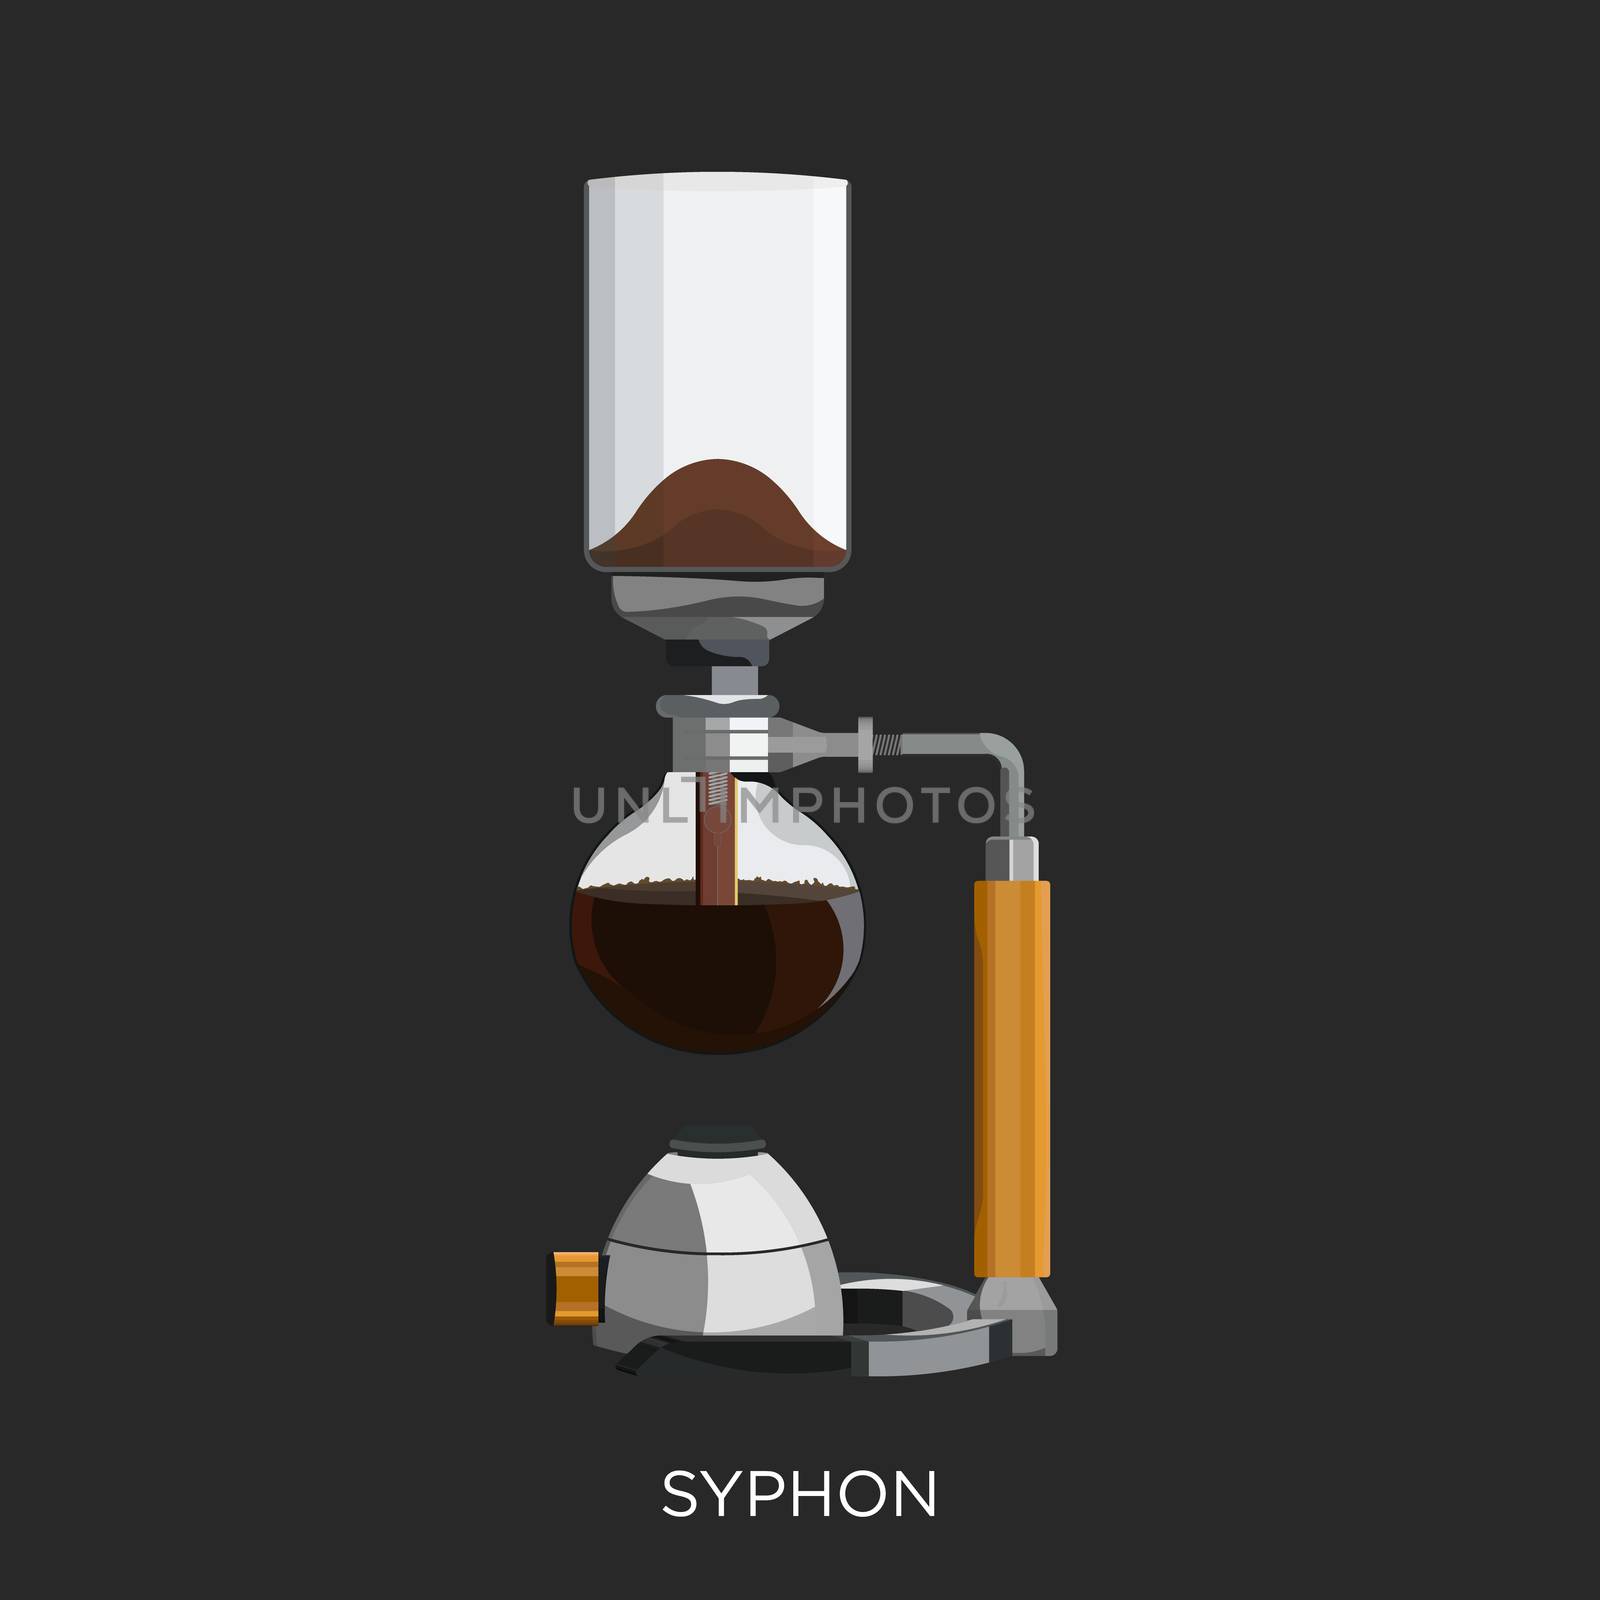 Syphon, a vacuum coffee maker with the wood handle, brews coffee using two chambers where vapor pressure and vacuum produce coffee.